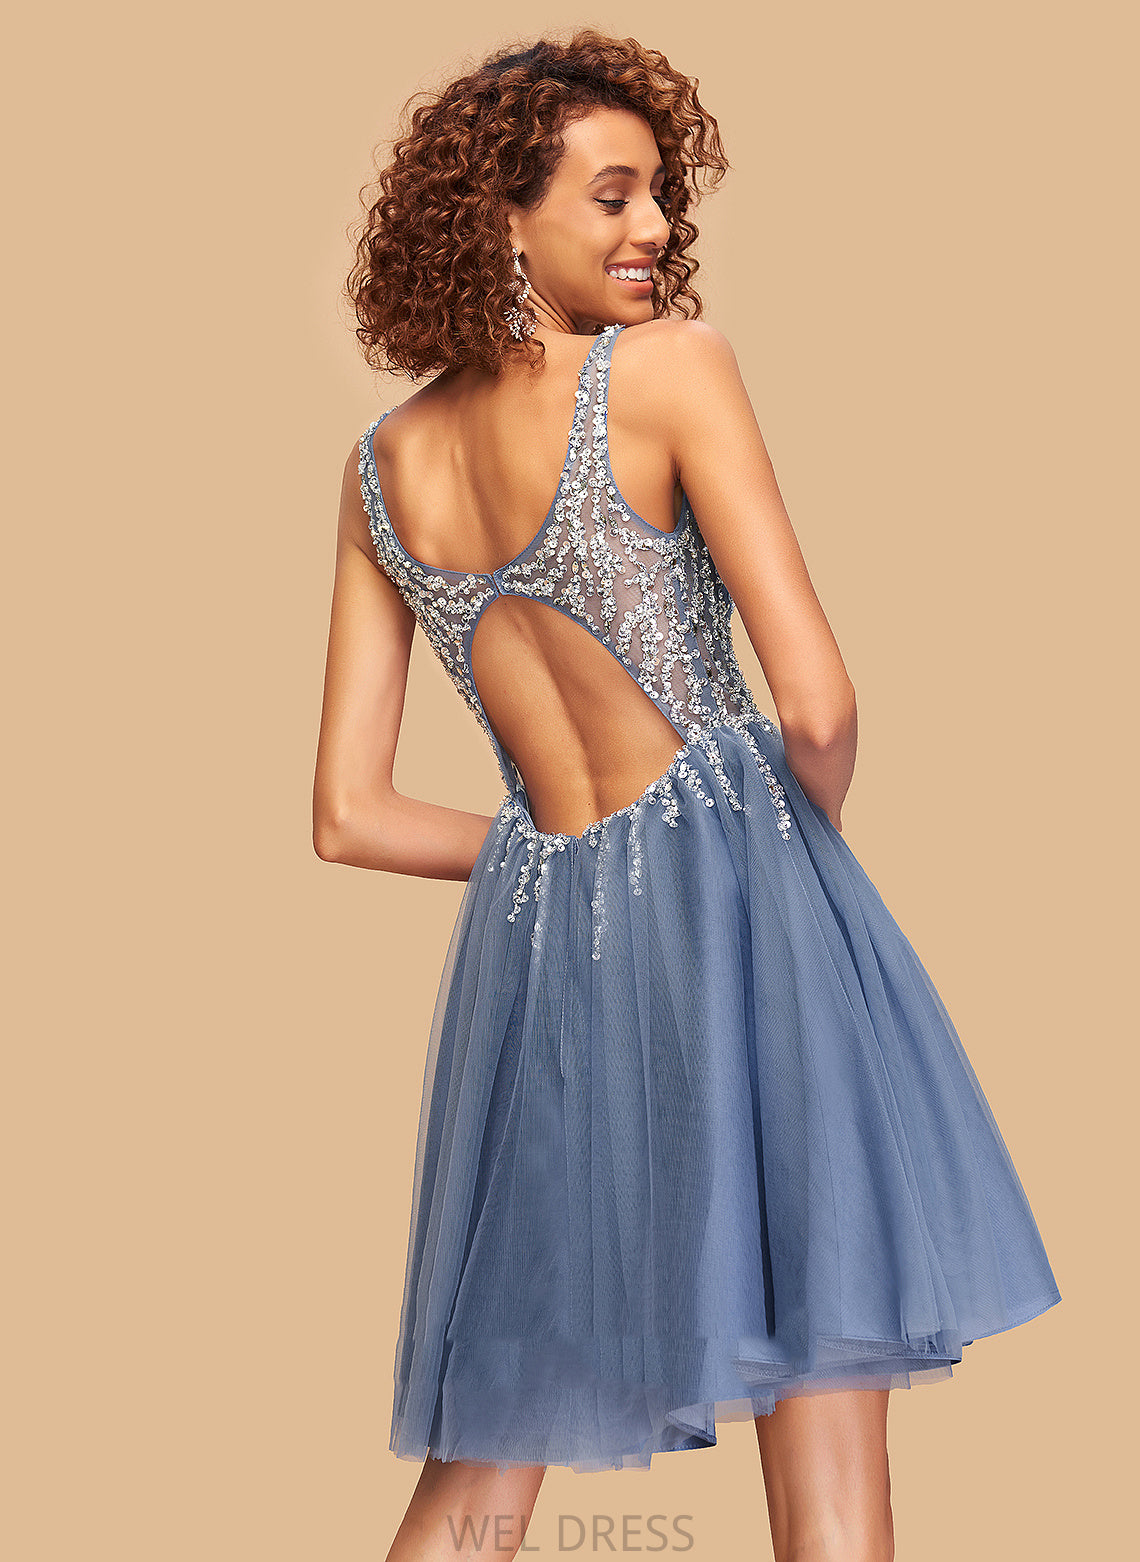 Short/Mini Homecoming Dresses Nia A-Line With Homecoming Dress Tulle V-neck Beading Sequins